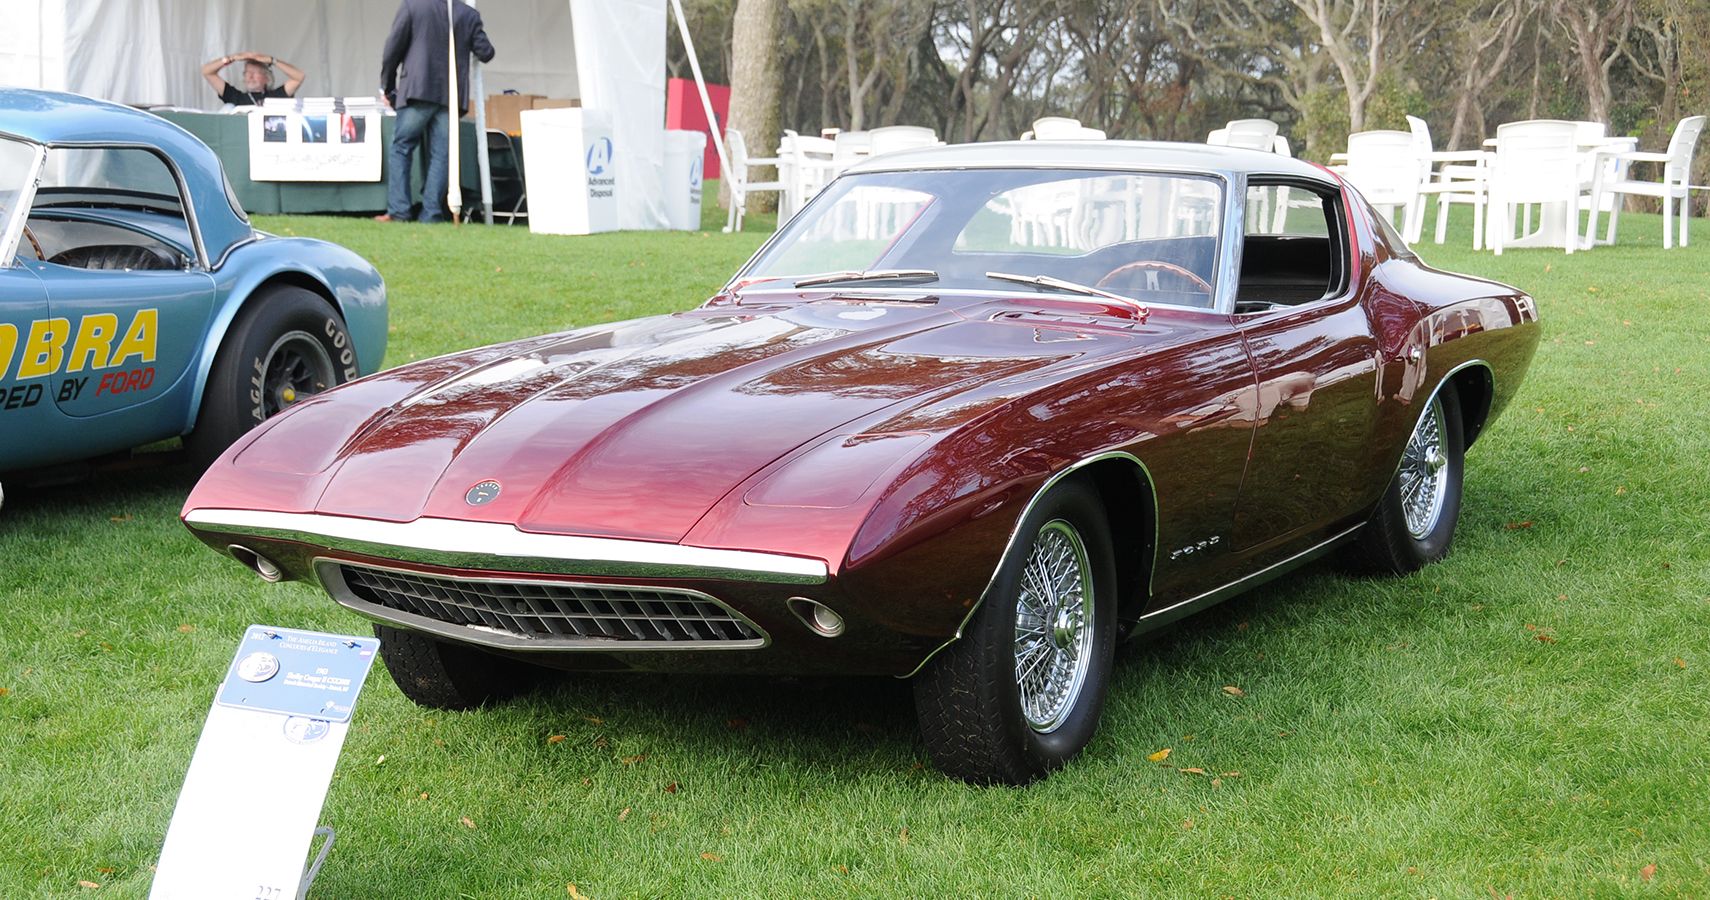 The Shelby Cobra Spawned The Ford Cougar Concept - Shelby Cobra Inspired 1963 Mercury Cougar II